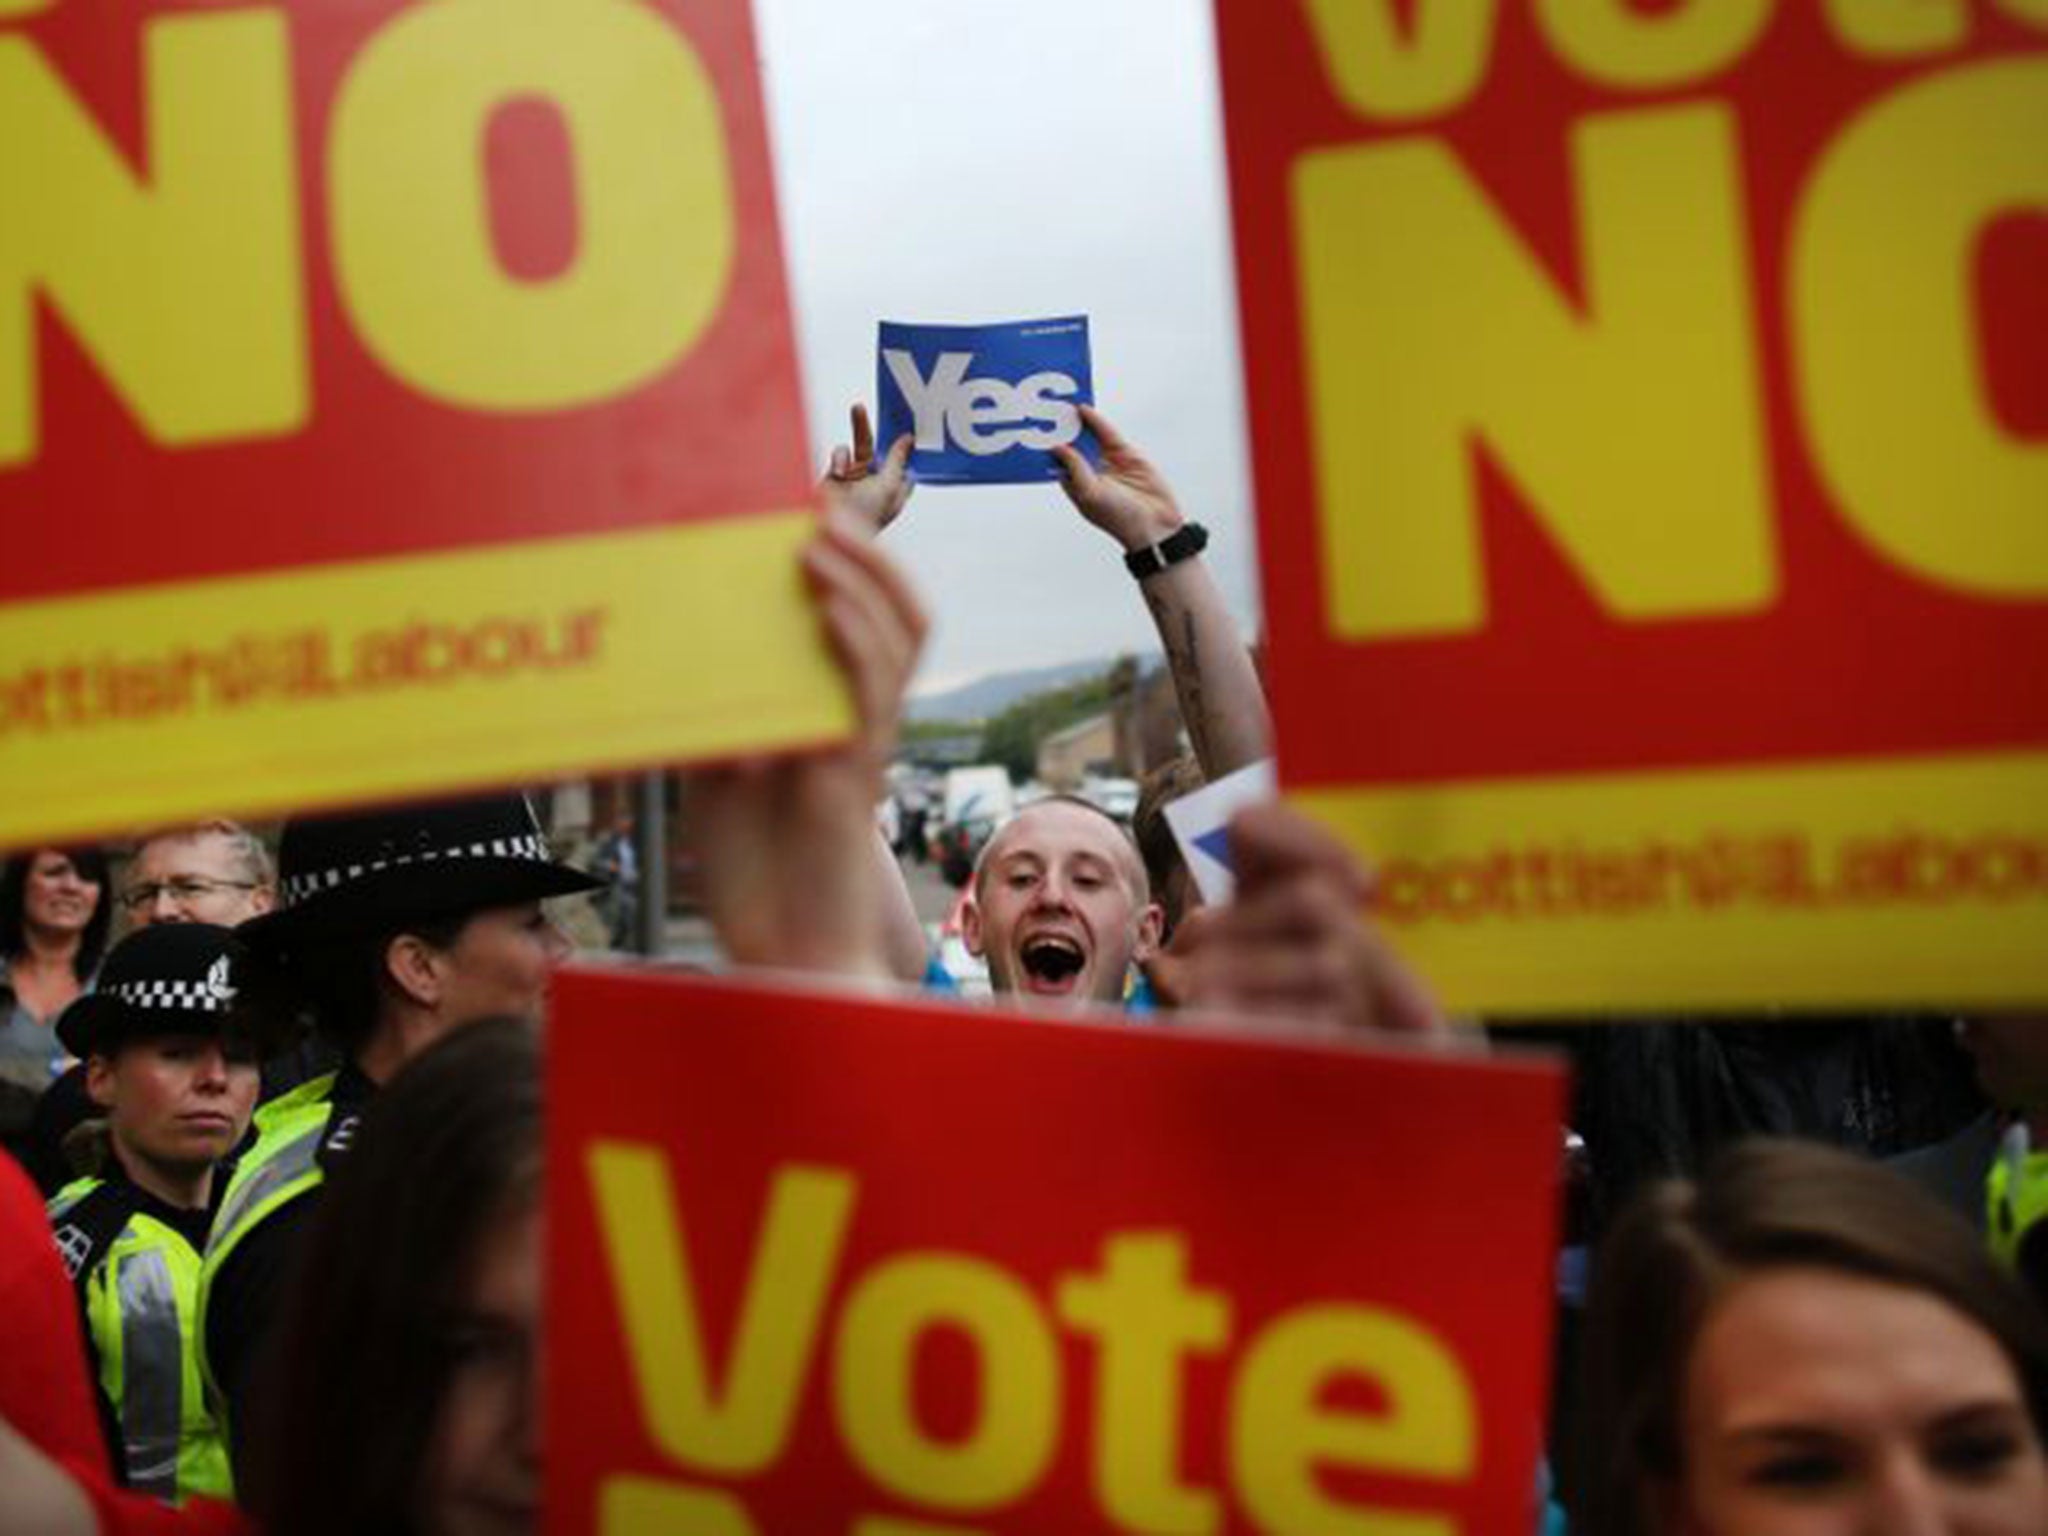 With a record turnout forecast, Thursday's poll will be unlike any election Scotland, or anywhere else in the UK, has experienced